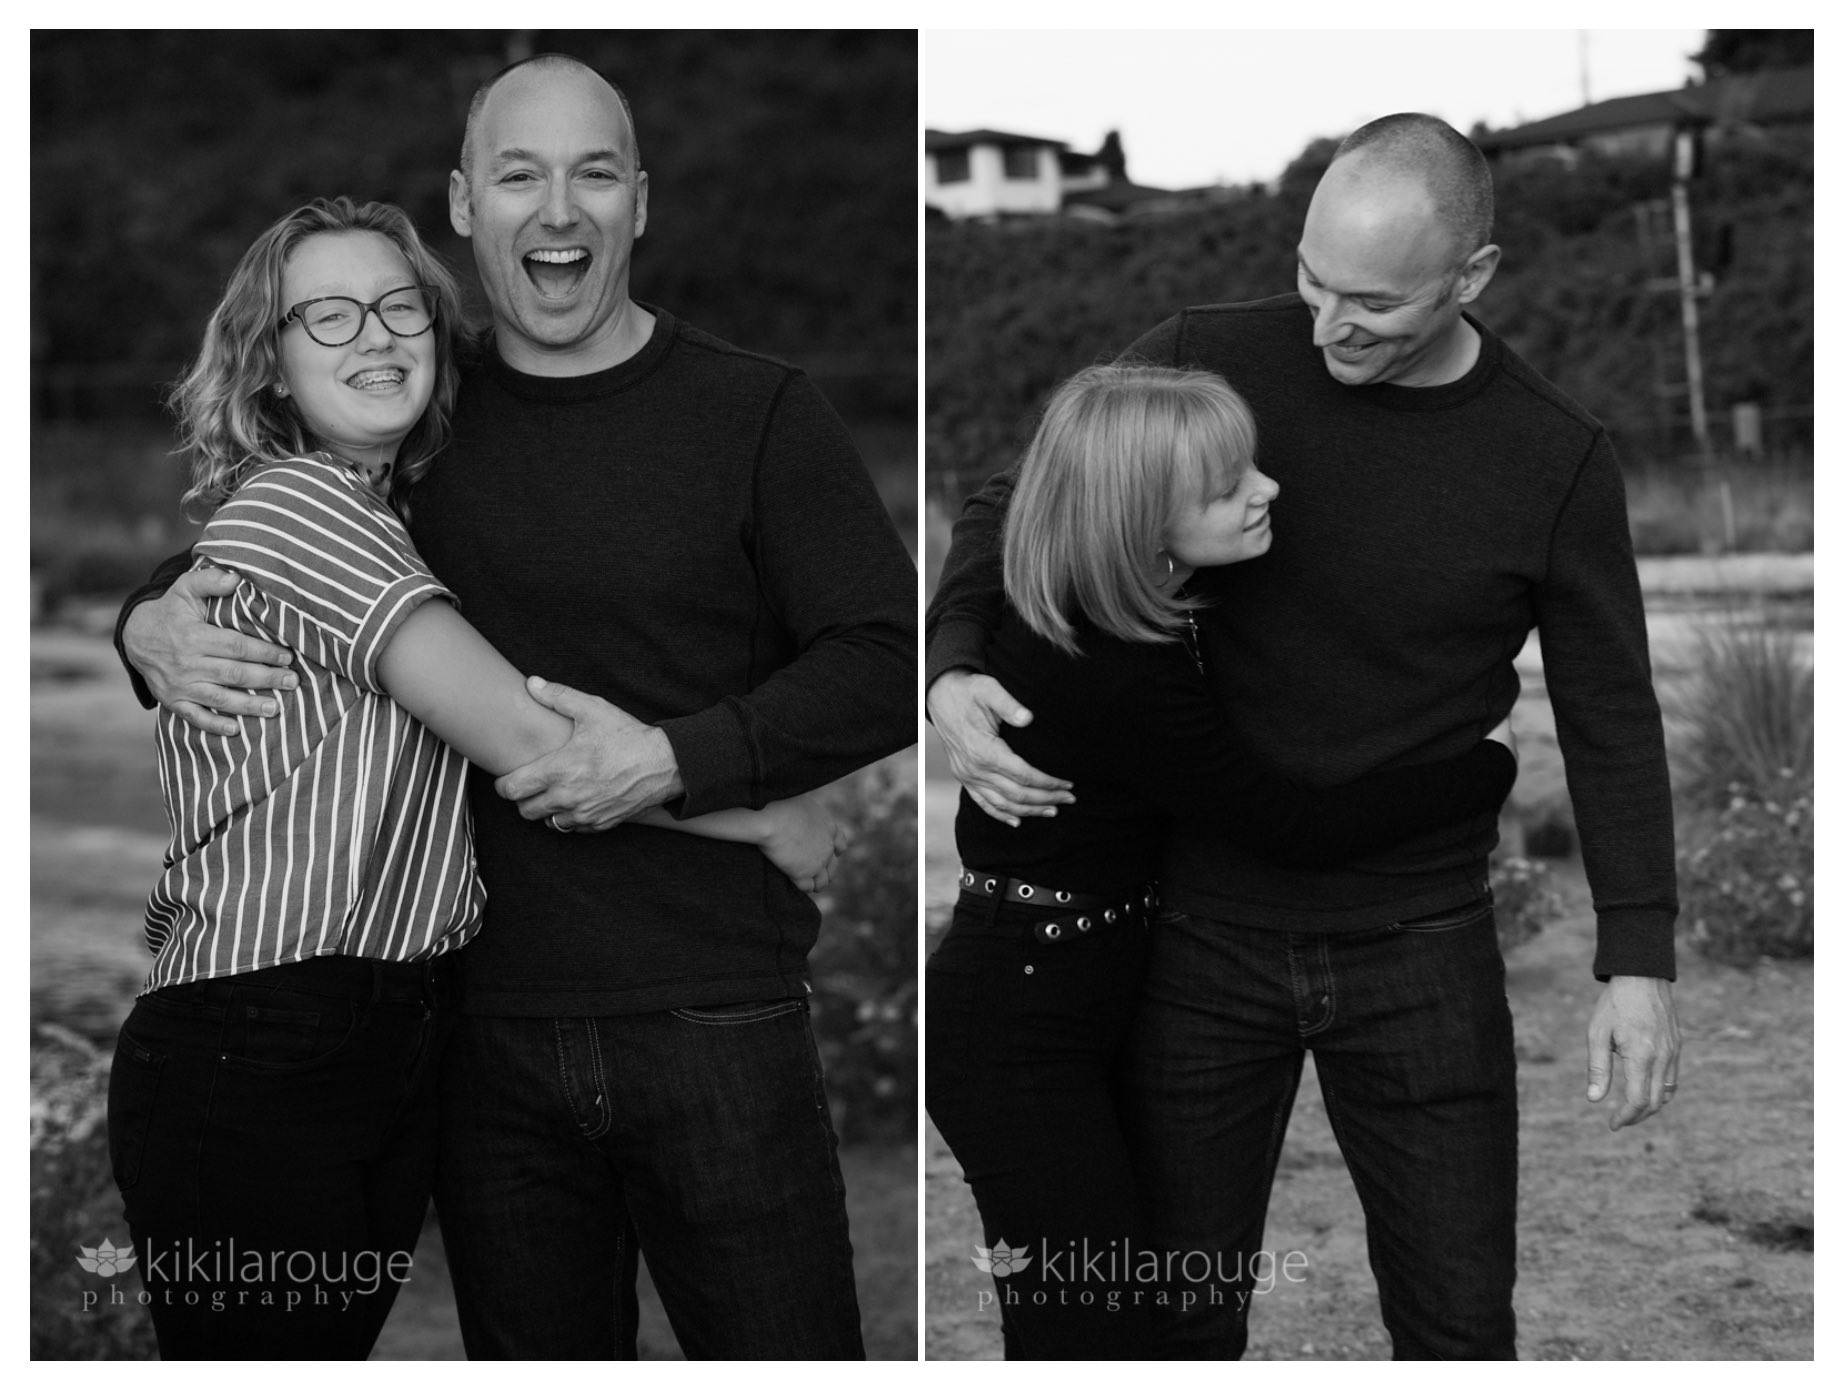 Two portraits of Dad in black with each of his daughters laughing